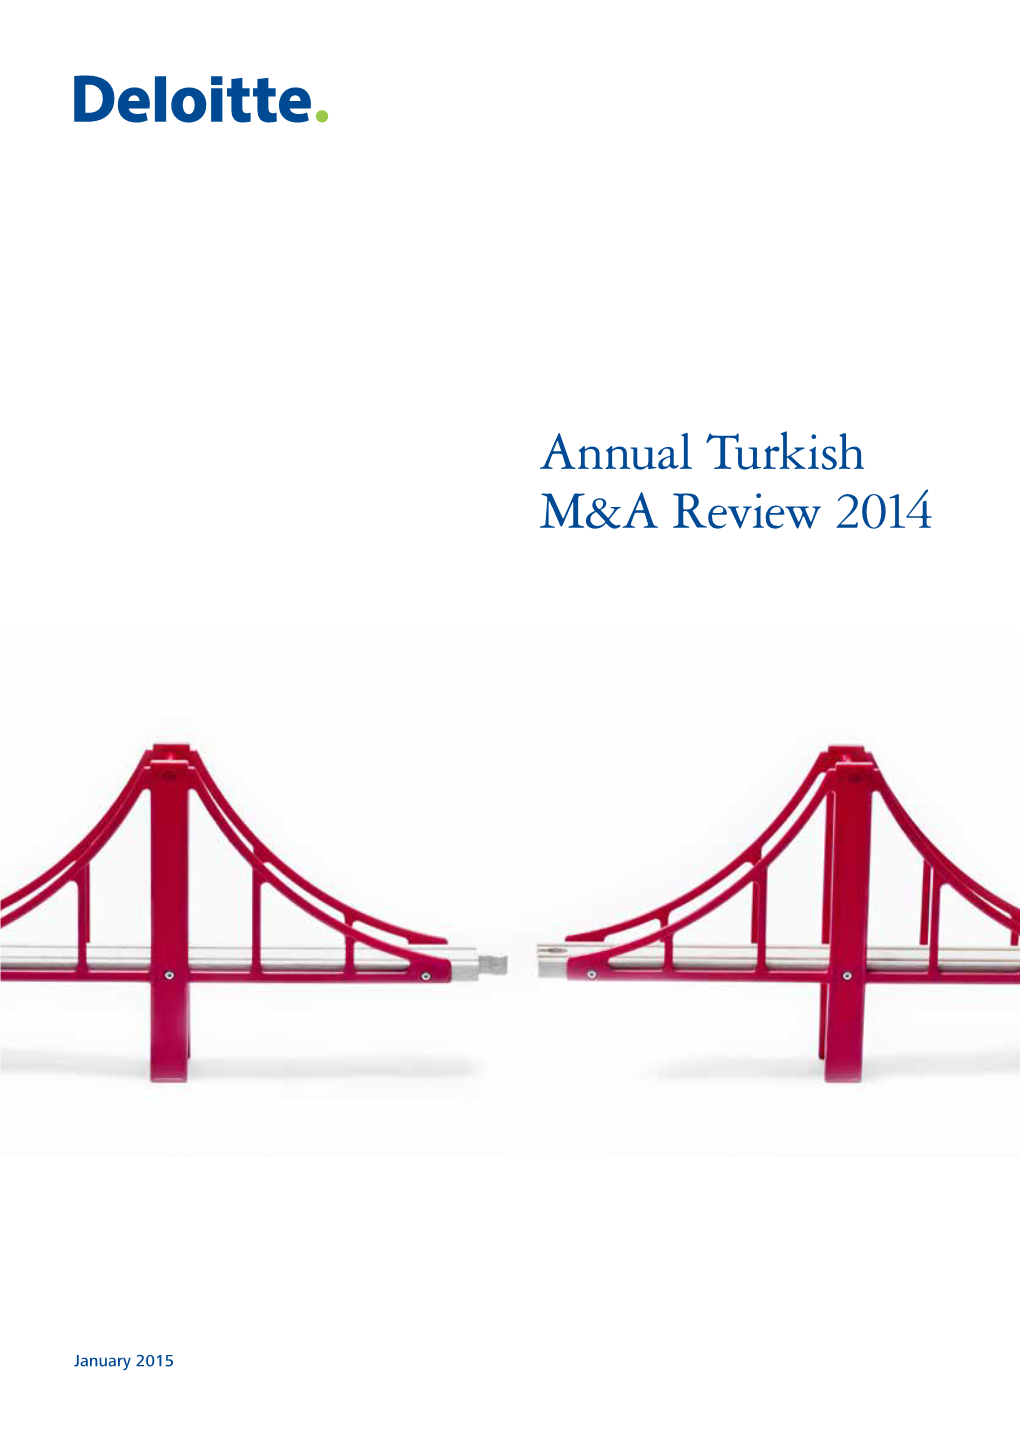 Annual Turkish M&A Review 2014